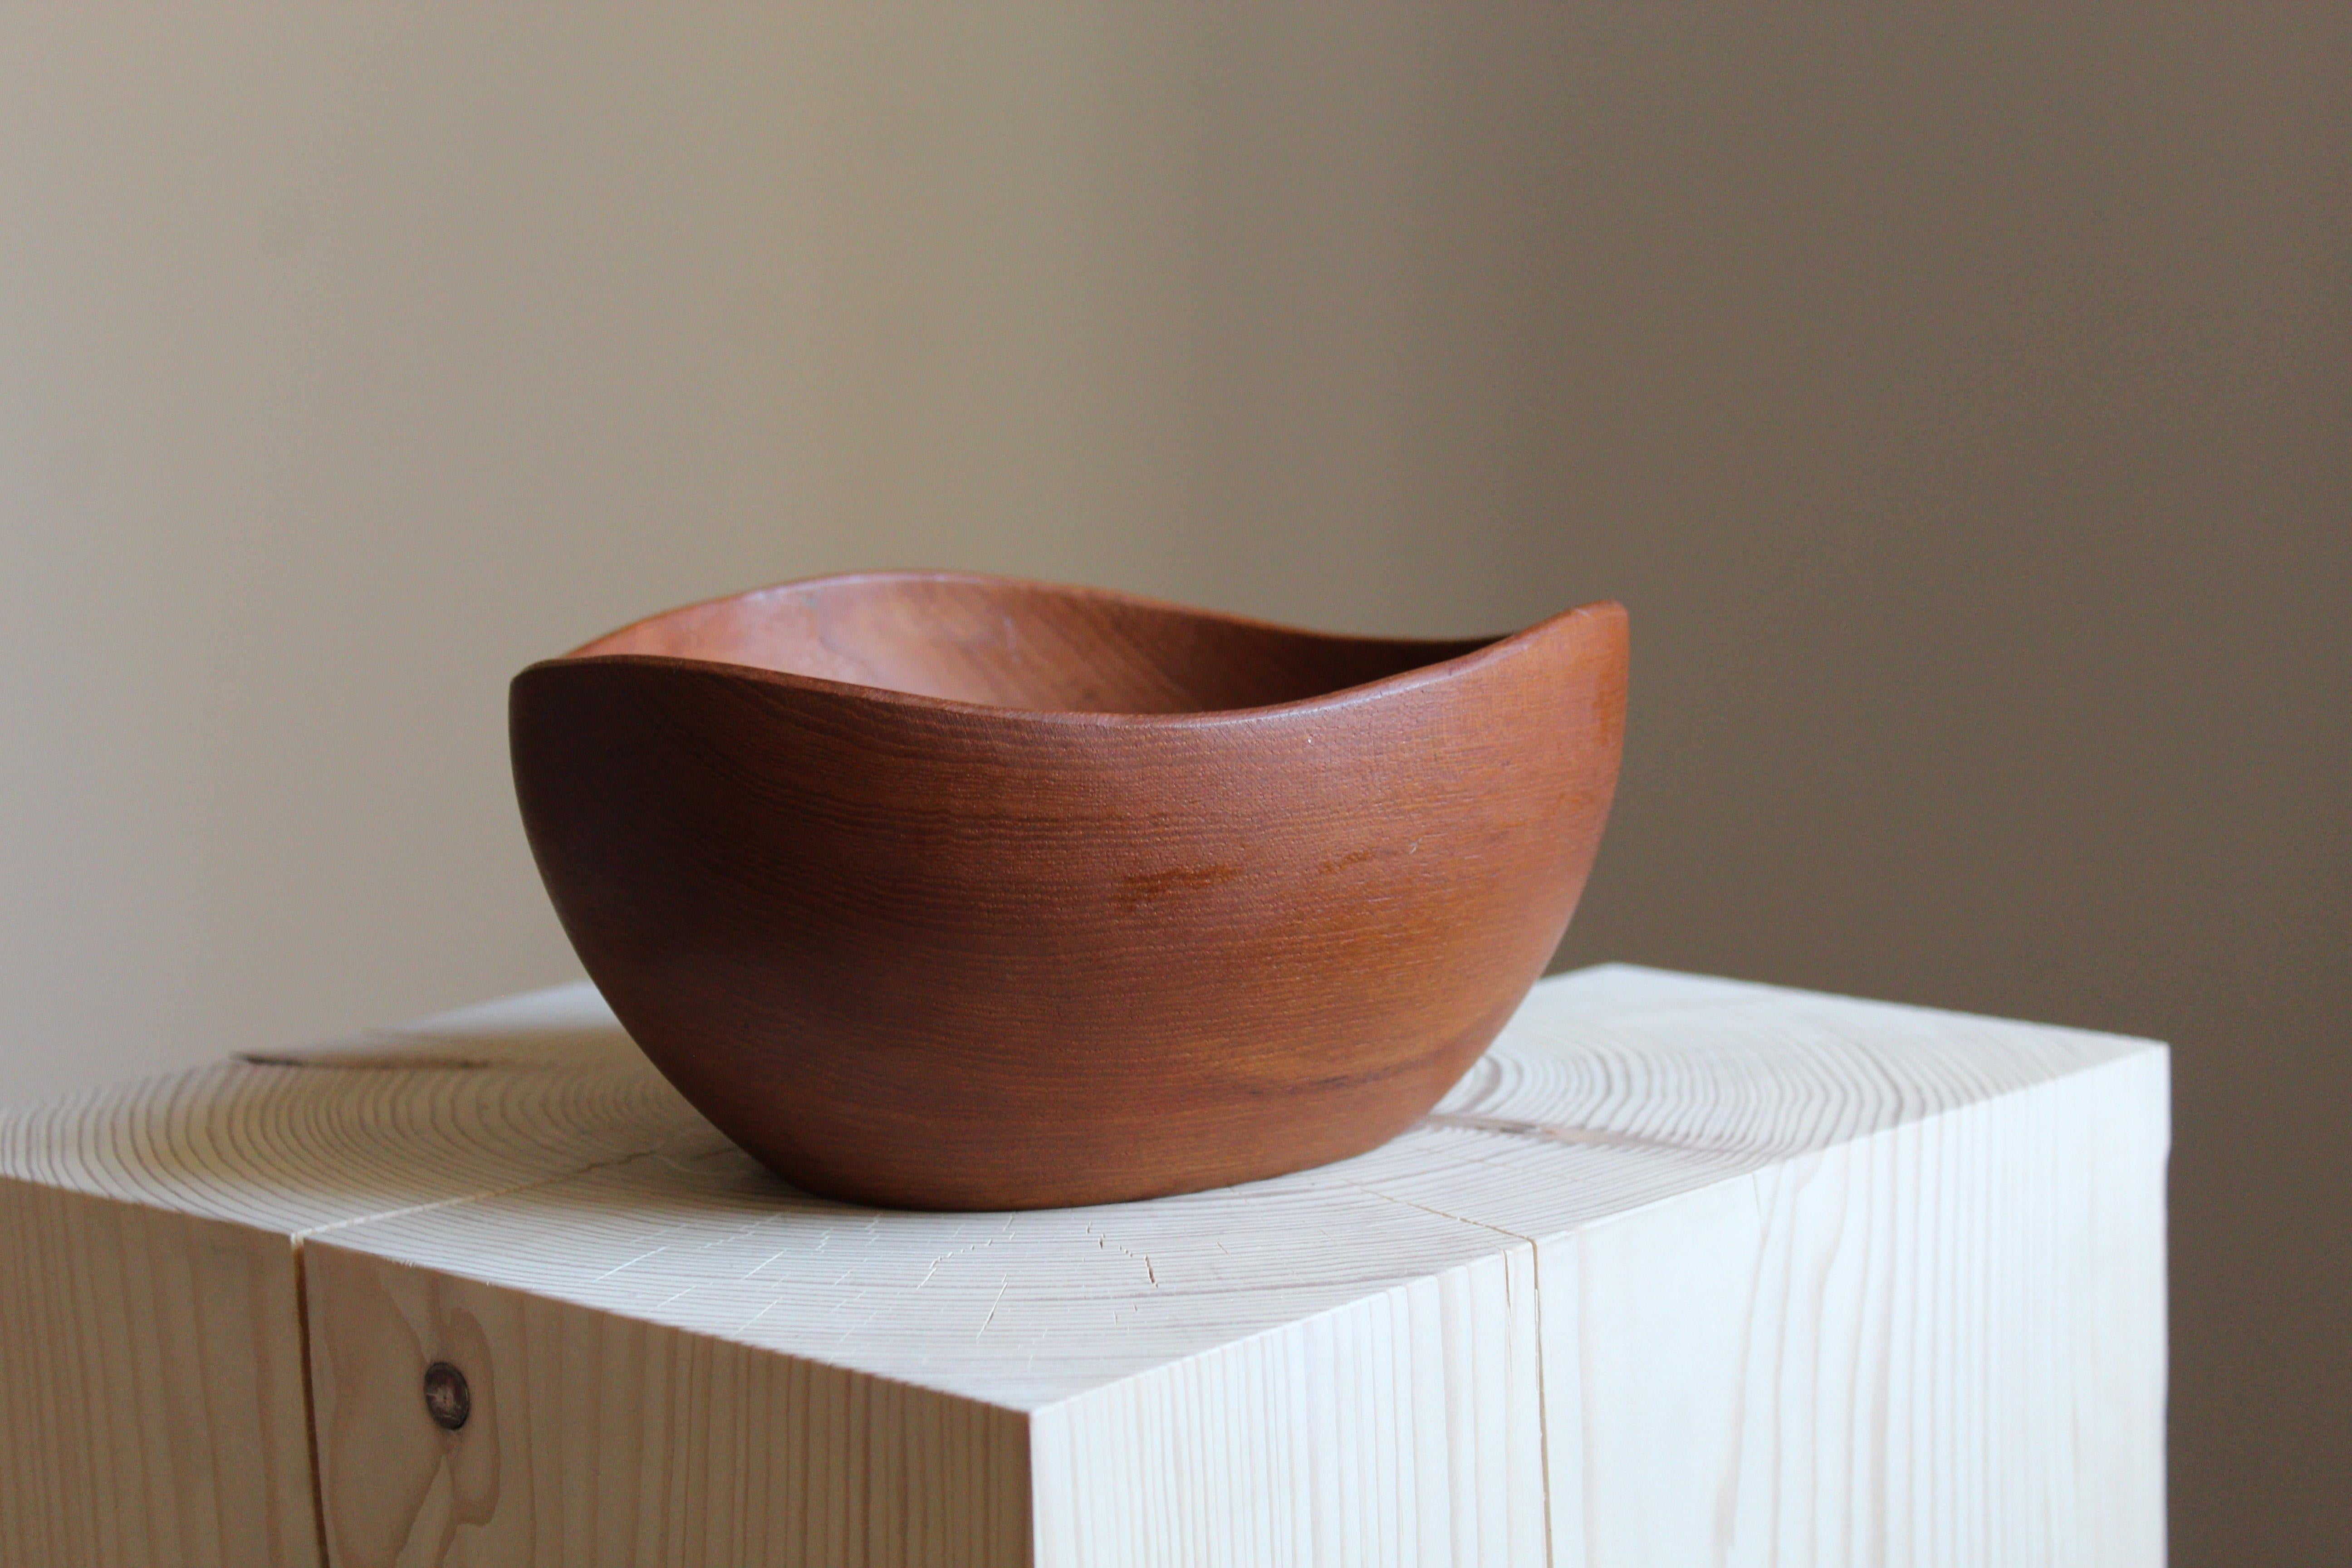 A small bowl or sculpture by Stig Sandberg. Handmade in his studio. Features carved signature and original label.

Other designers of the period include Finn Juhl, Hans Wegner, Kaare Klint, and Alvar Aalto.